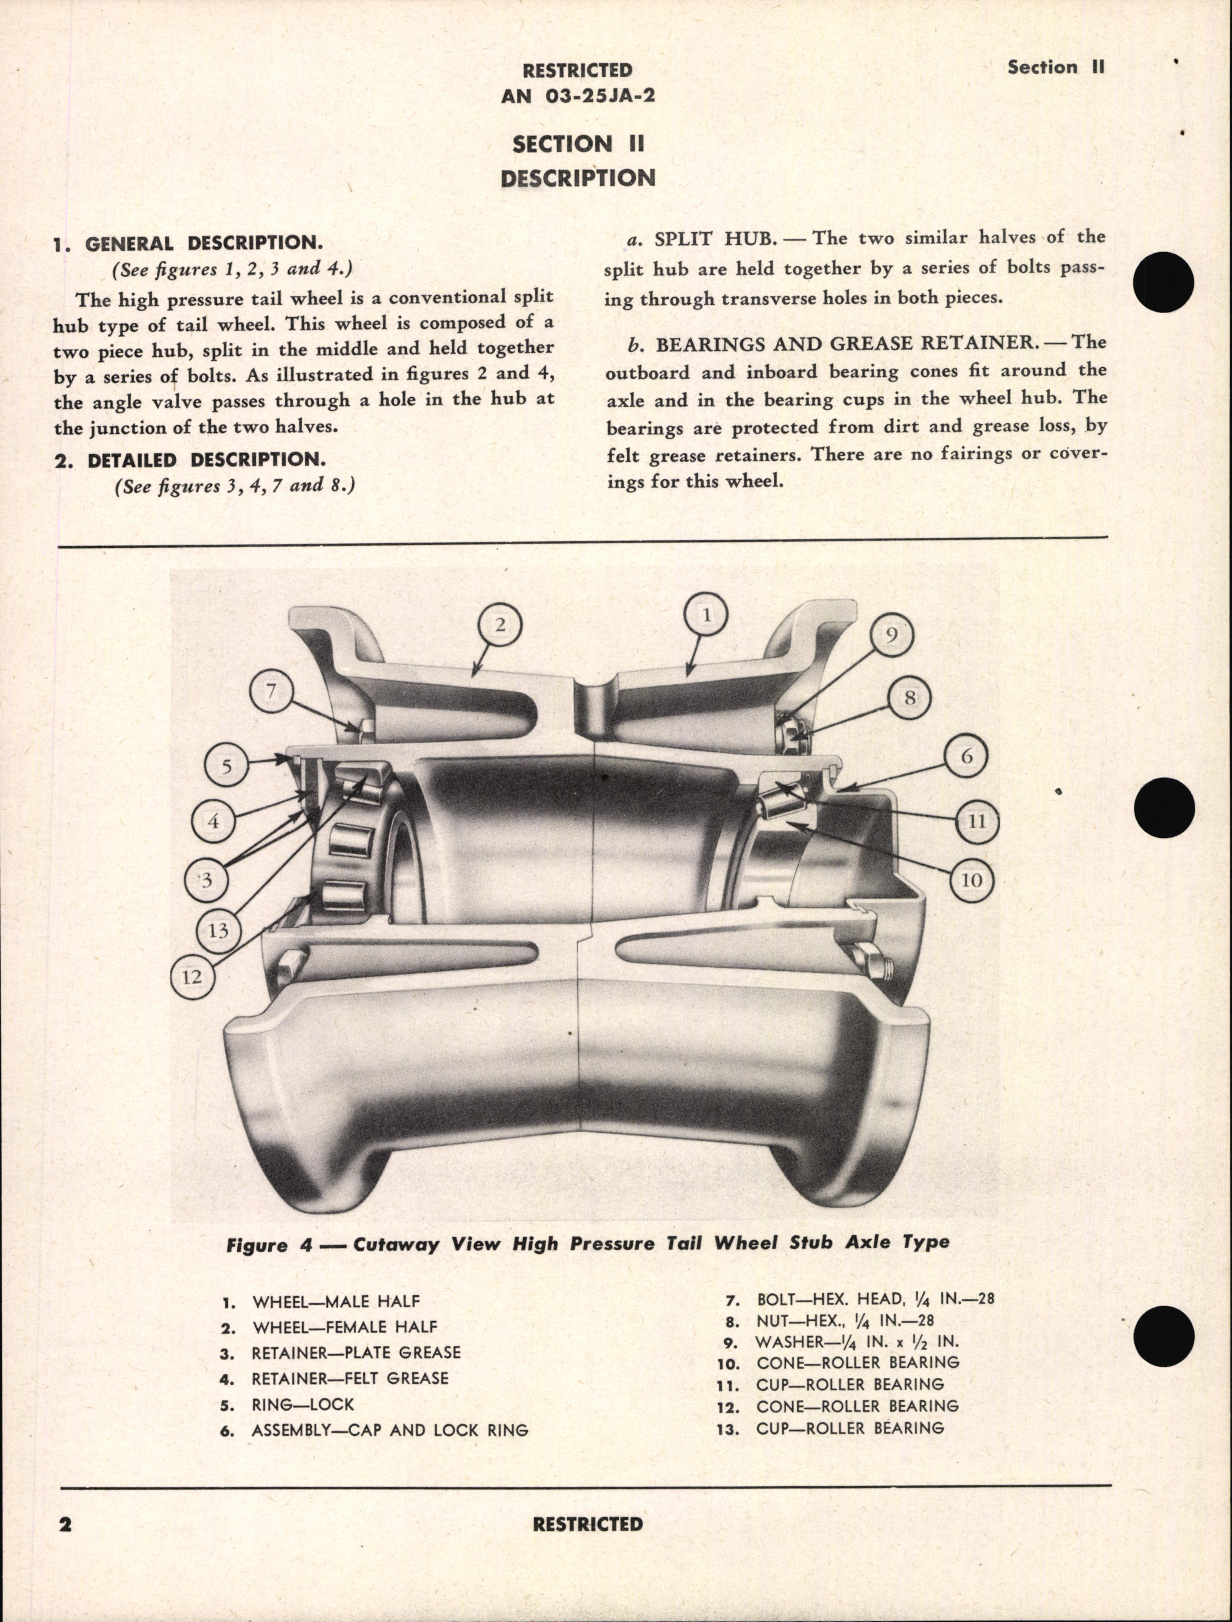 Sample page 6 from AirCorps Library document: Handbook of Instructions with Parts Catalog for High Pressure Tail Wheels